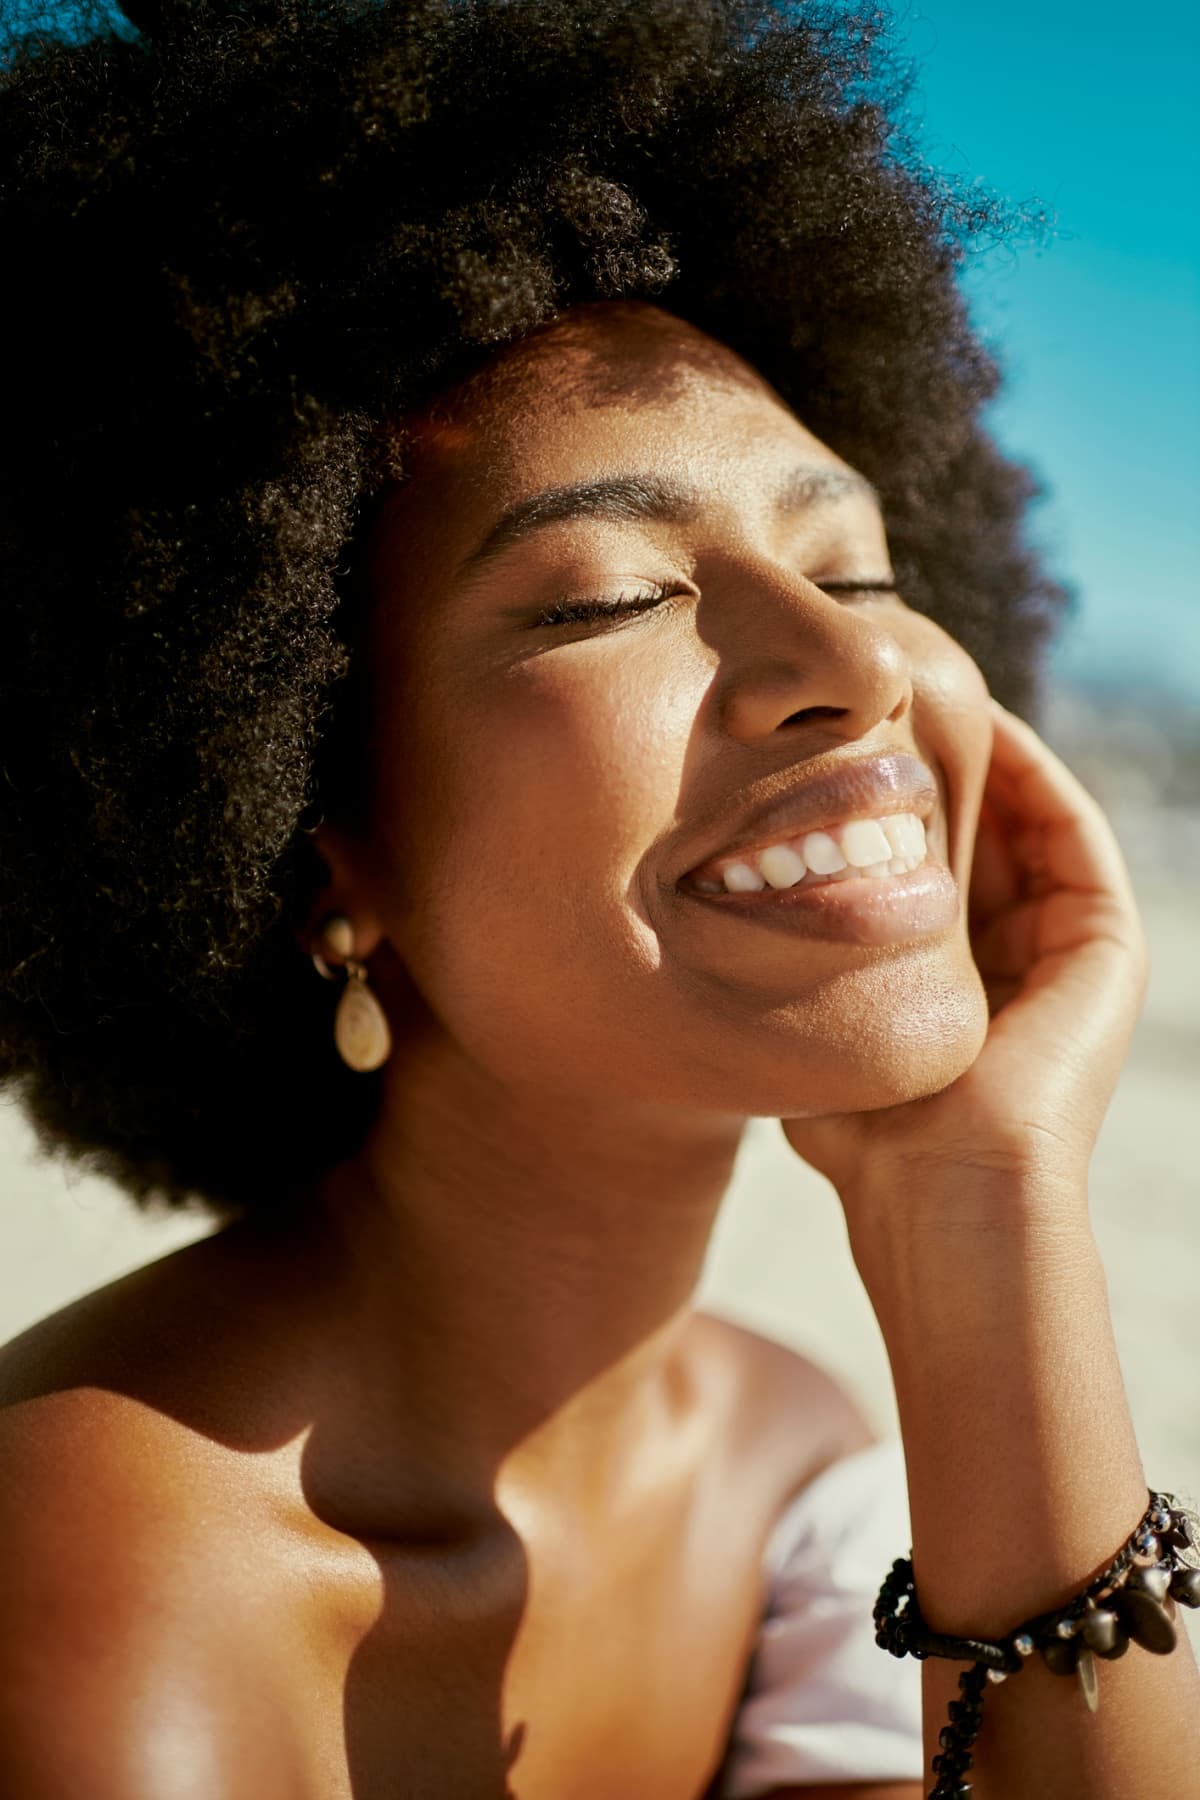 Happy, smiling and beautiful woman with an afro closed eyes closeup. Gorgeous, attractive and desirable young black female wearing makeup with good skin looking stunning in the sun on hot Spring day